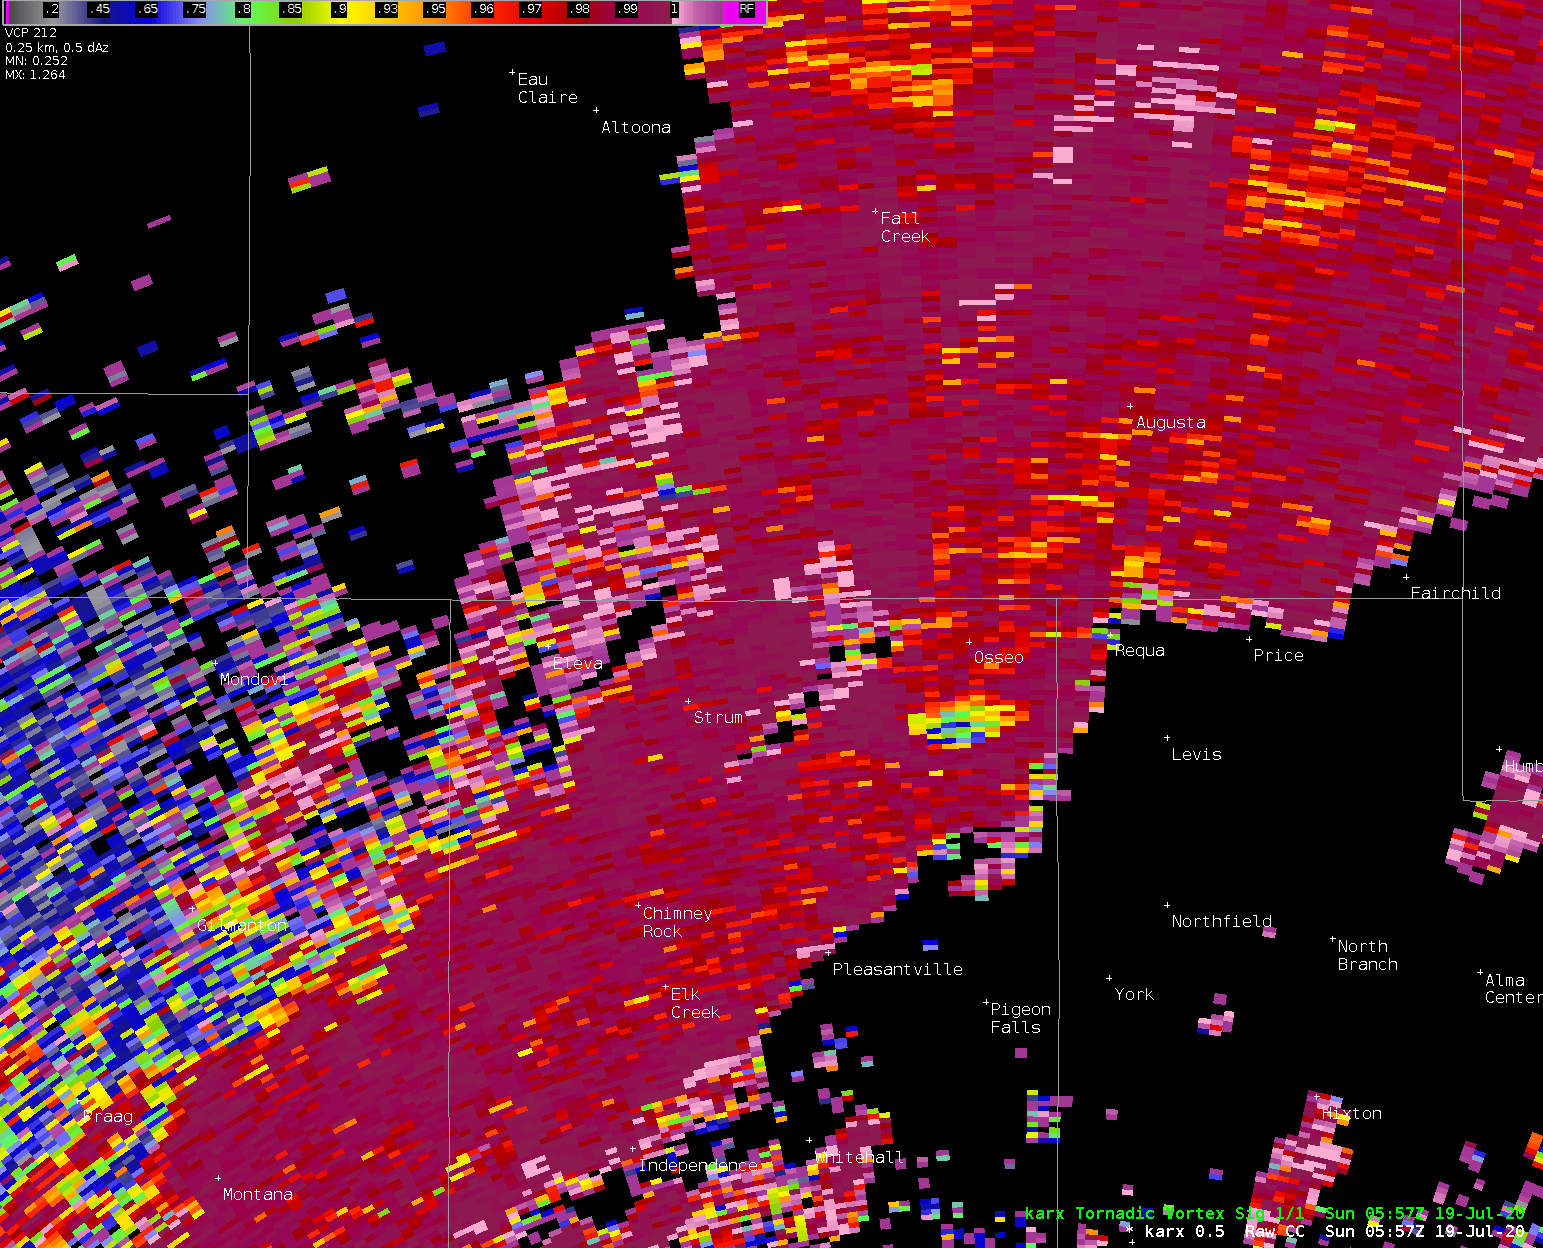 Correlation Coefficient dropout associated with tornadic debris